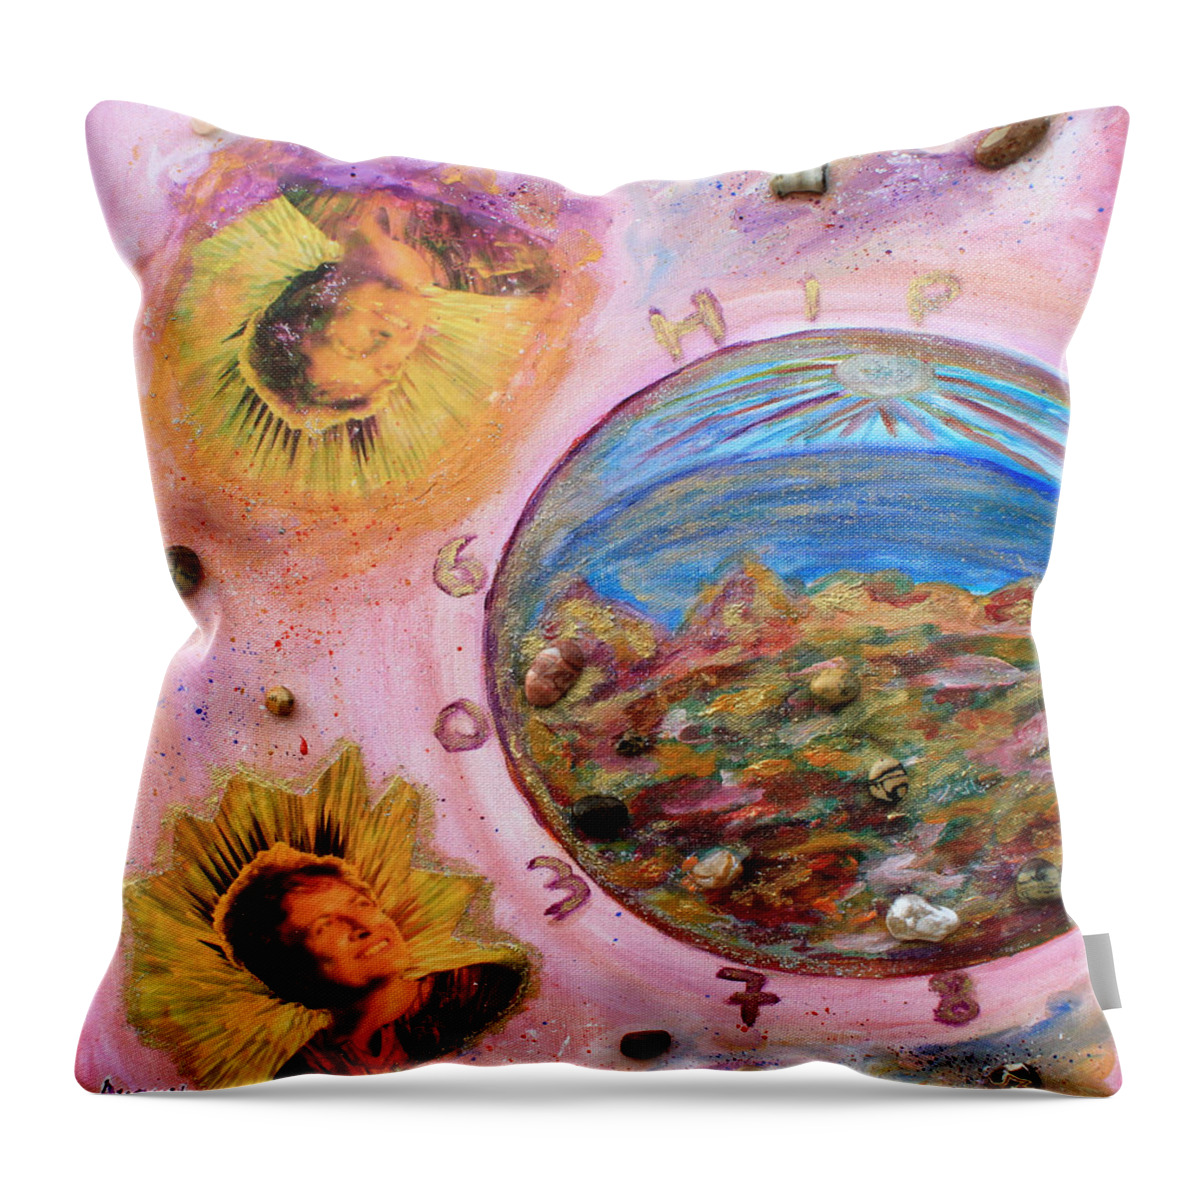 Augusta Stylianou Throw Pillow featuring the painting Order Your Birth Star by Augusta Stylianou